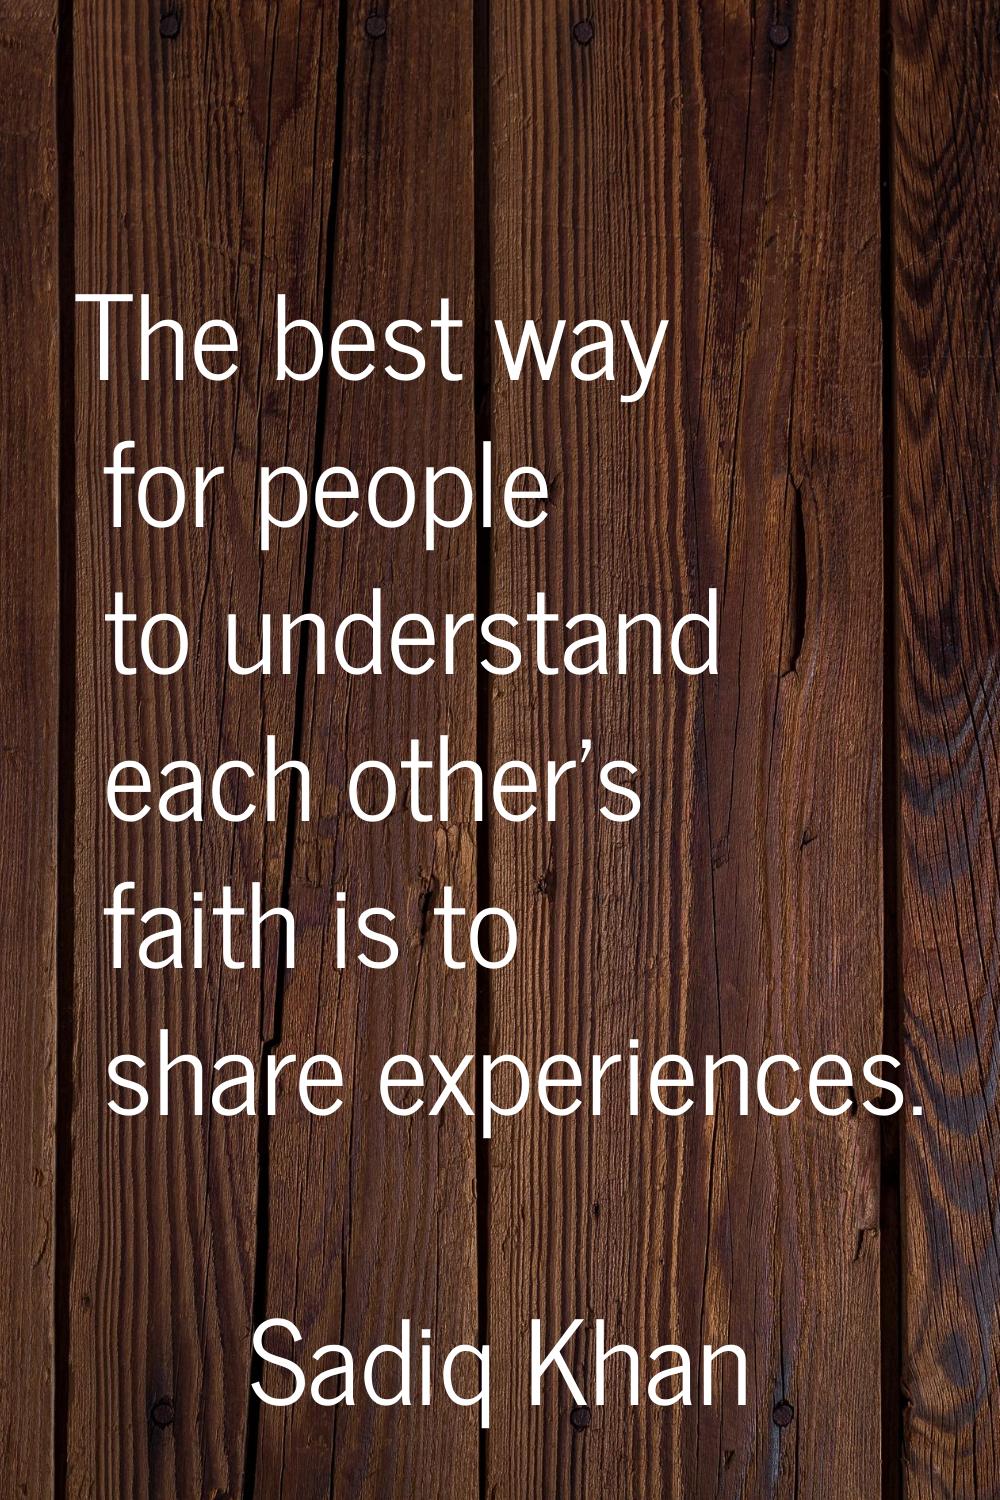 The best way for people to understand each other's faith is to share experiences.